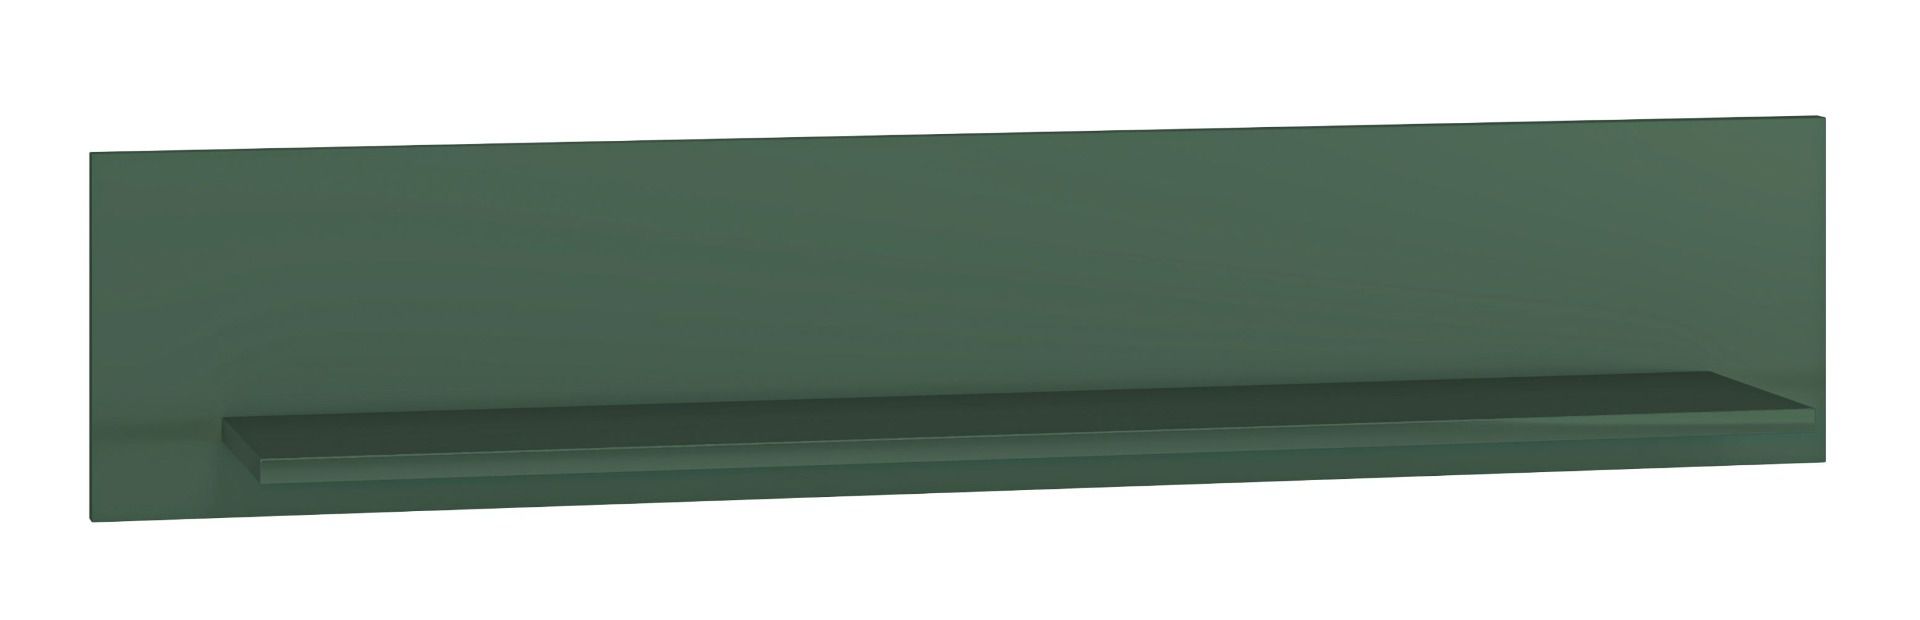 Suspended rack / Wall shelf Inari 08, Colour: Forest Green - Measurements: 23 x 120 x 22 cm (H x W x D)